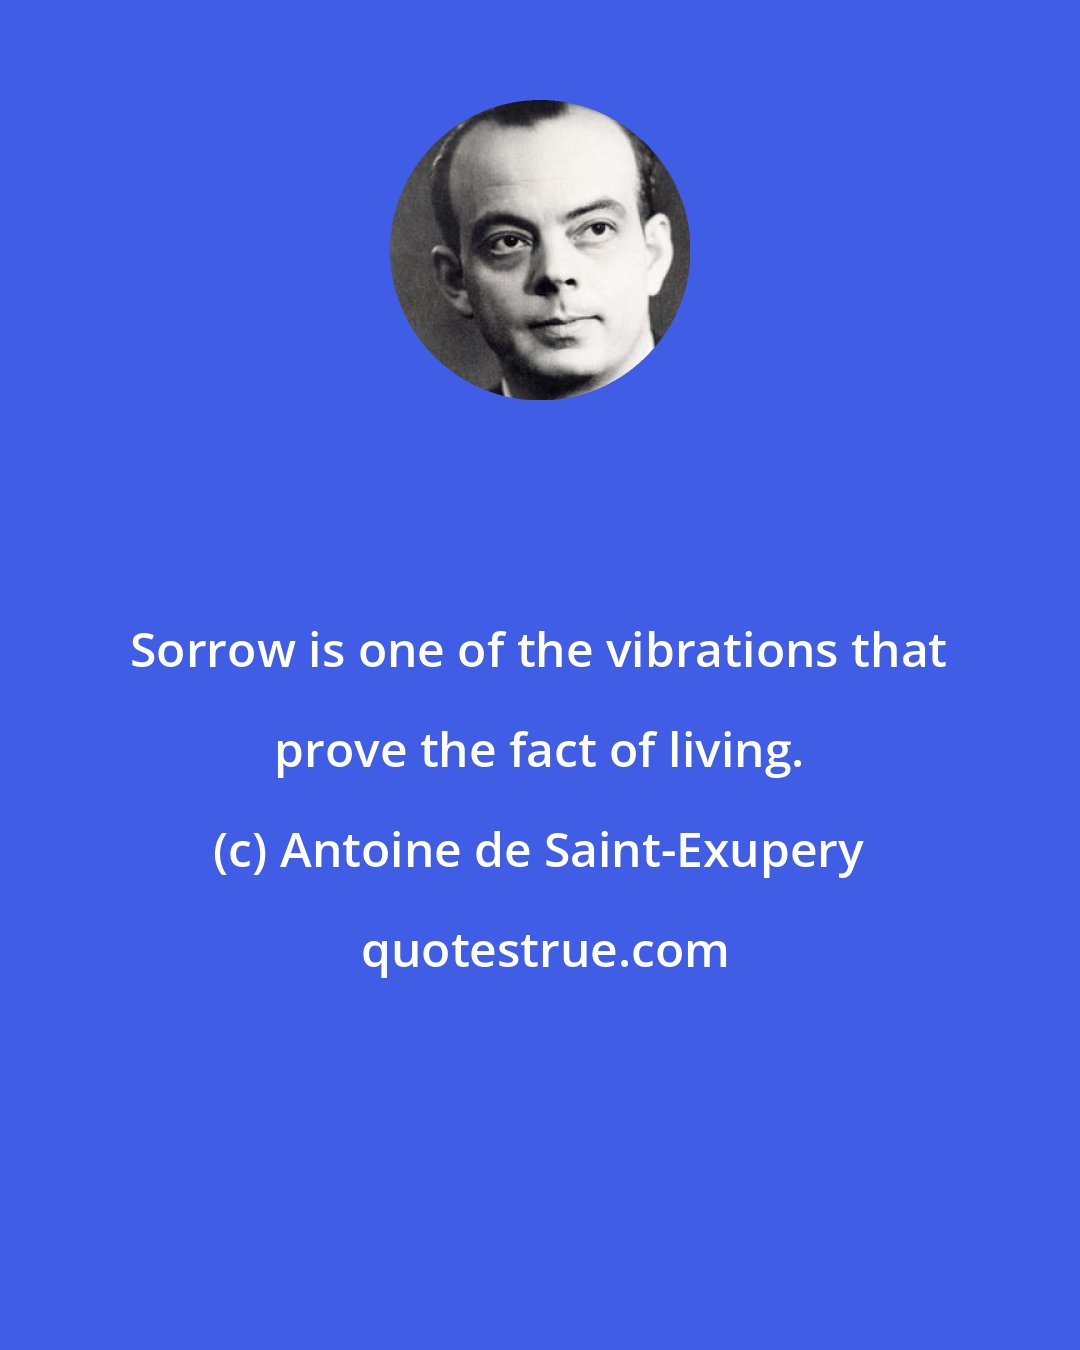 Antoine de Saint-Exupery: Sorrow is one of the vibrations that prove the fact of living.